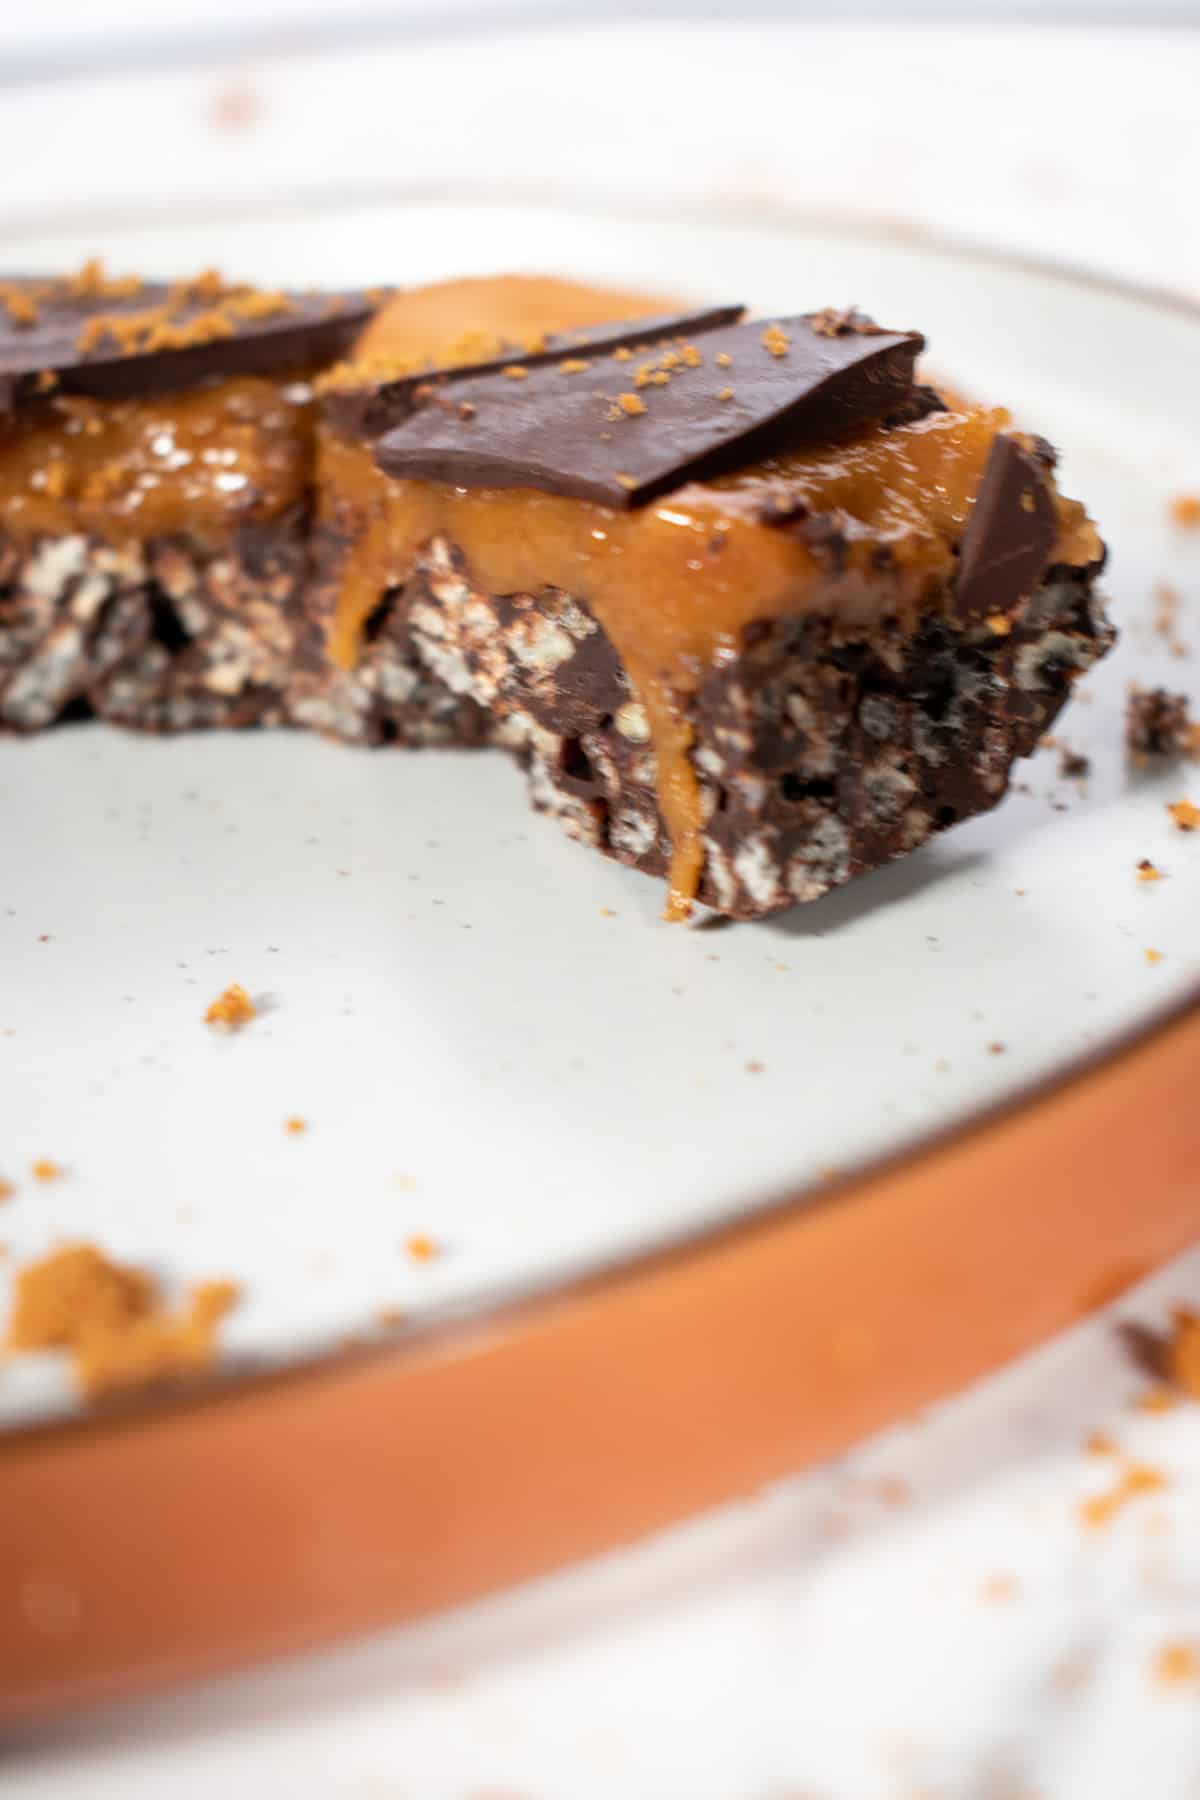 A single vegan caramel bar on a brown and white plate.